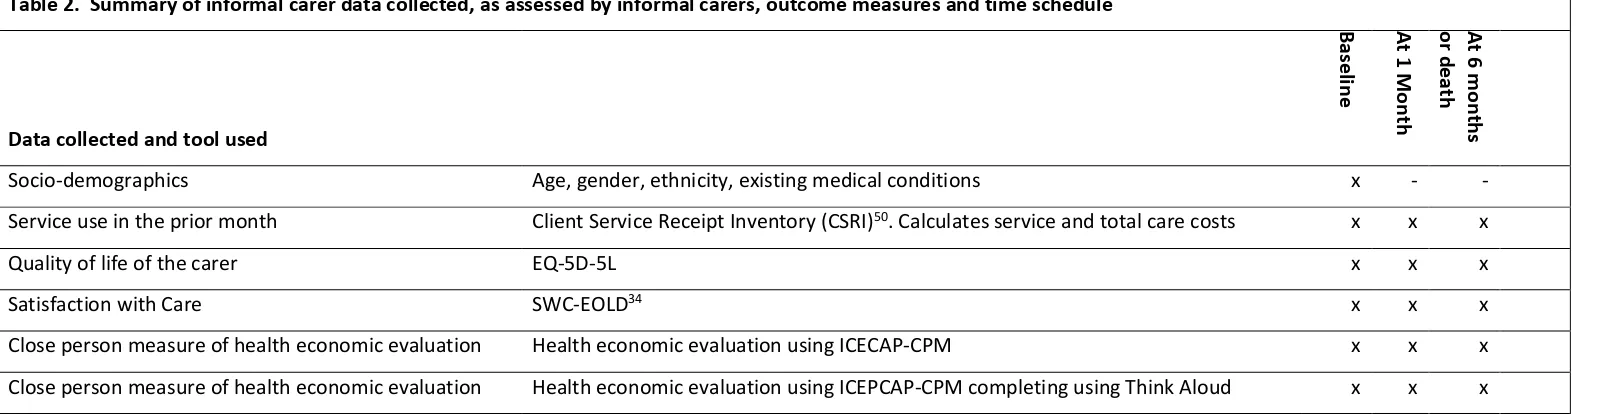 Table 2.  Summary of informal carer data collected, as assessed by informal carers, outcome measures and time schedule  